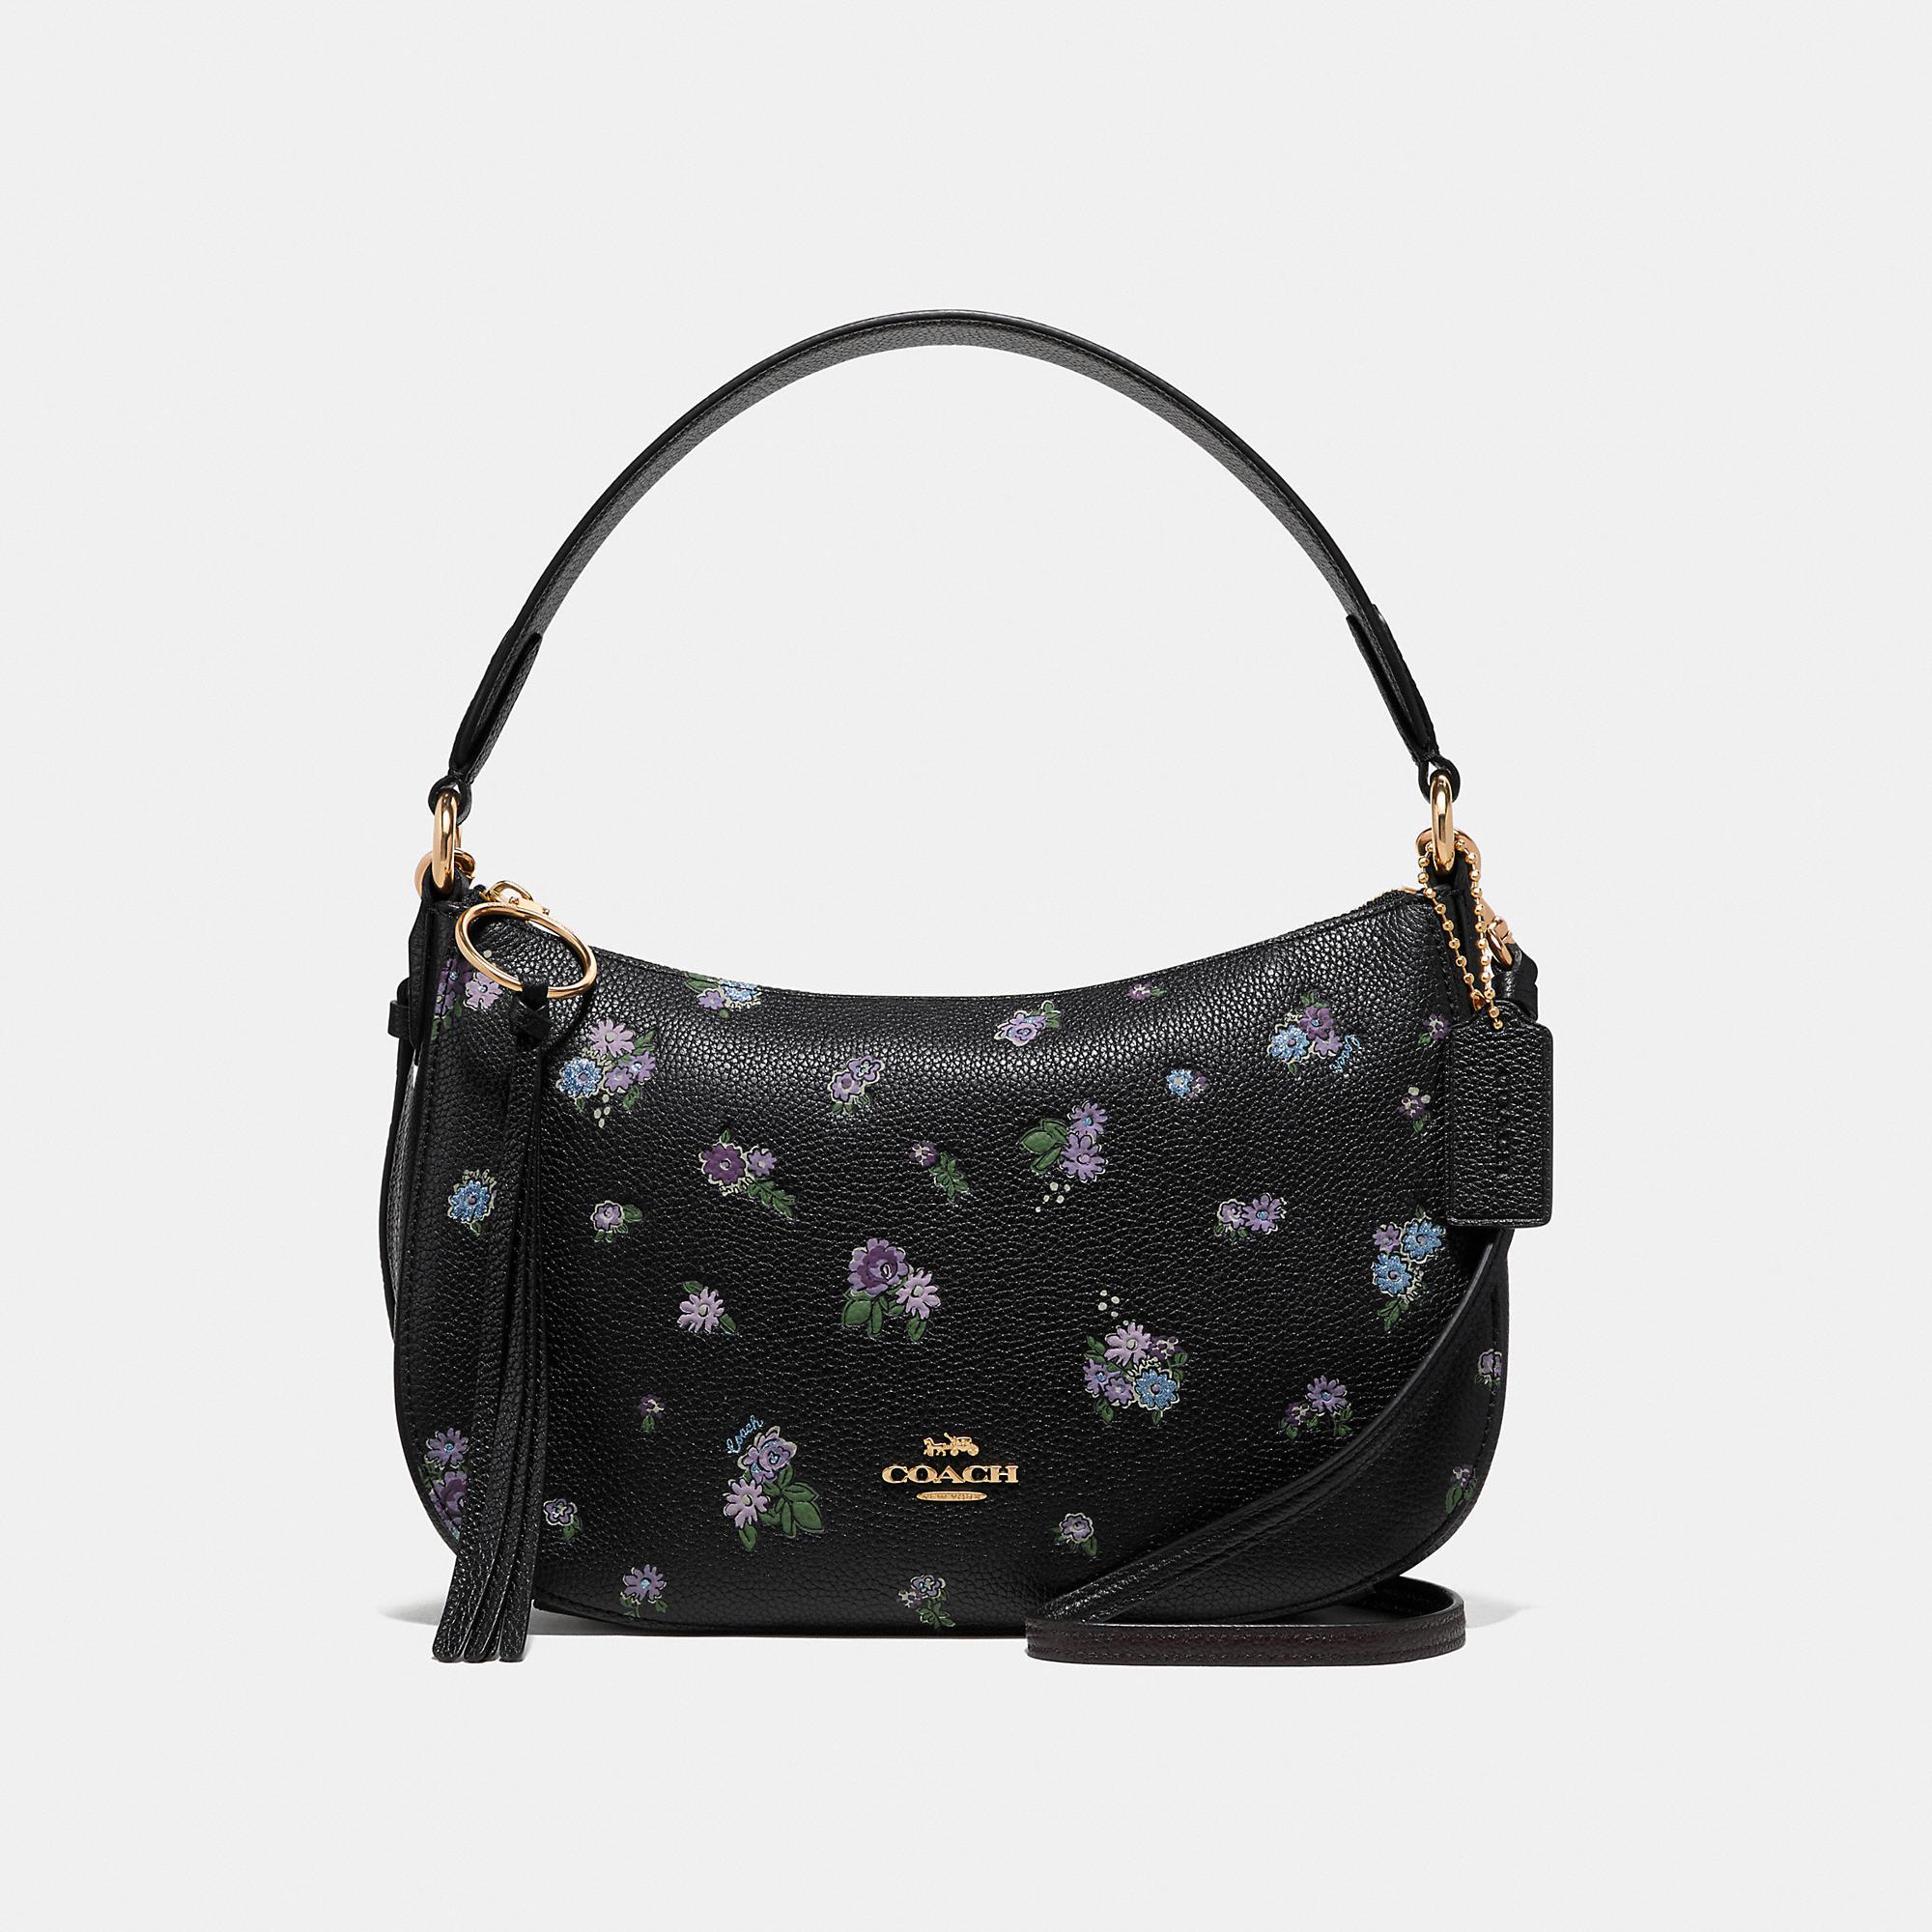 COACH Sutton Crossbody With Floral Print in Black - Lyst